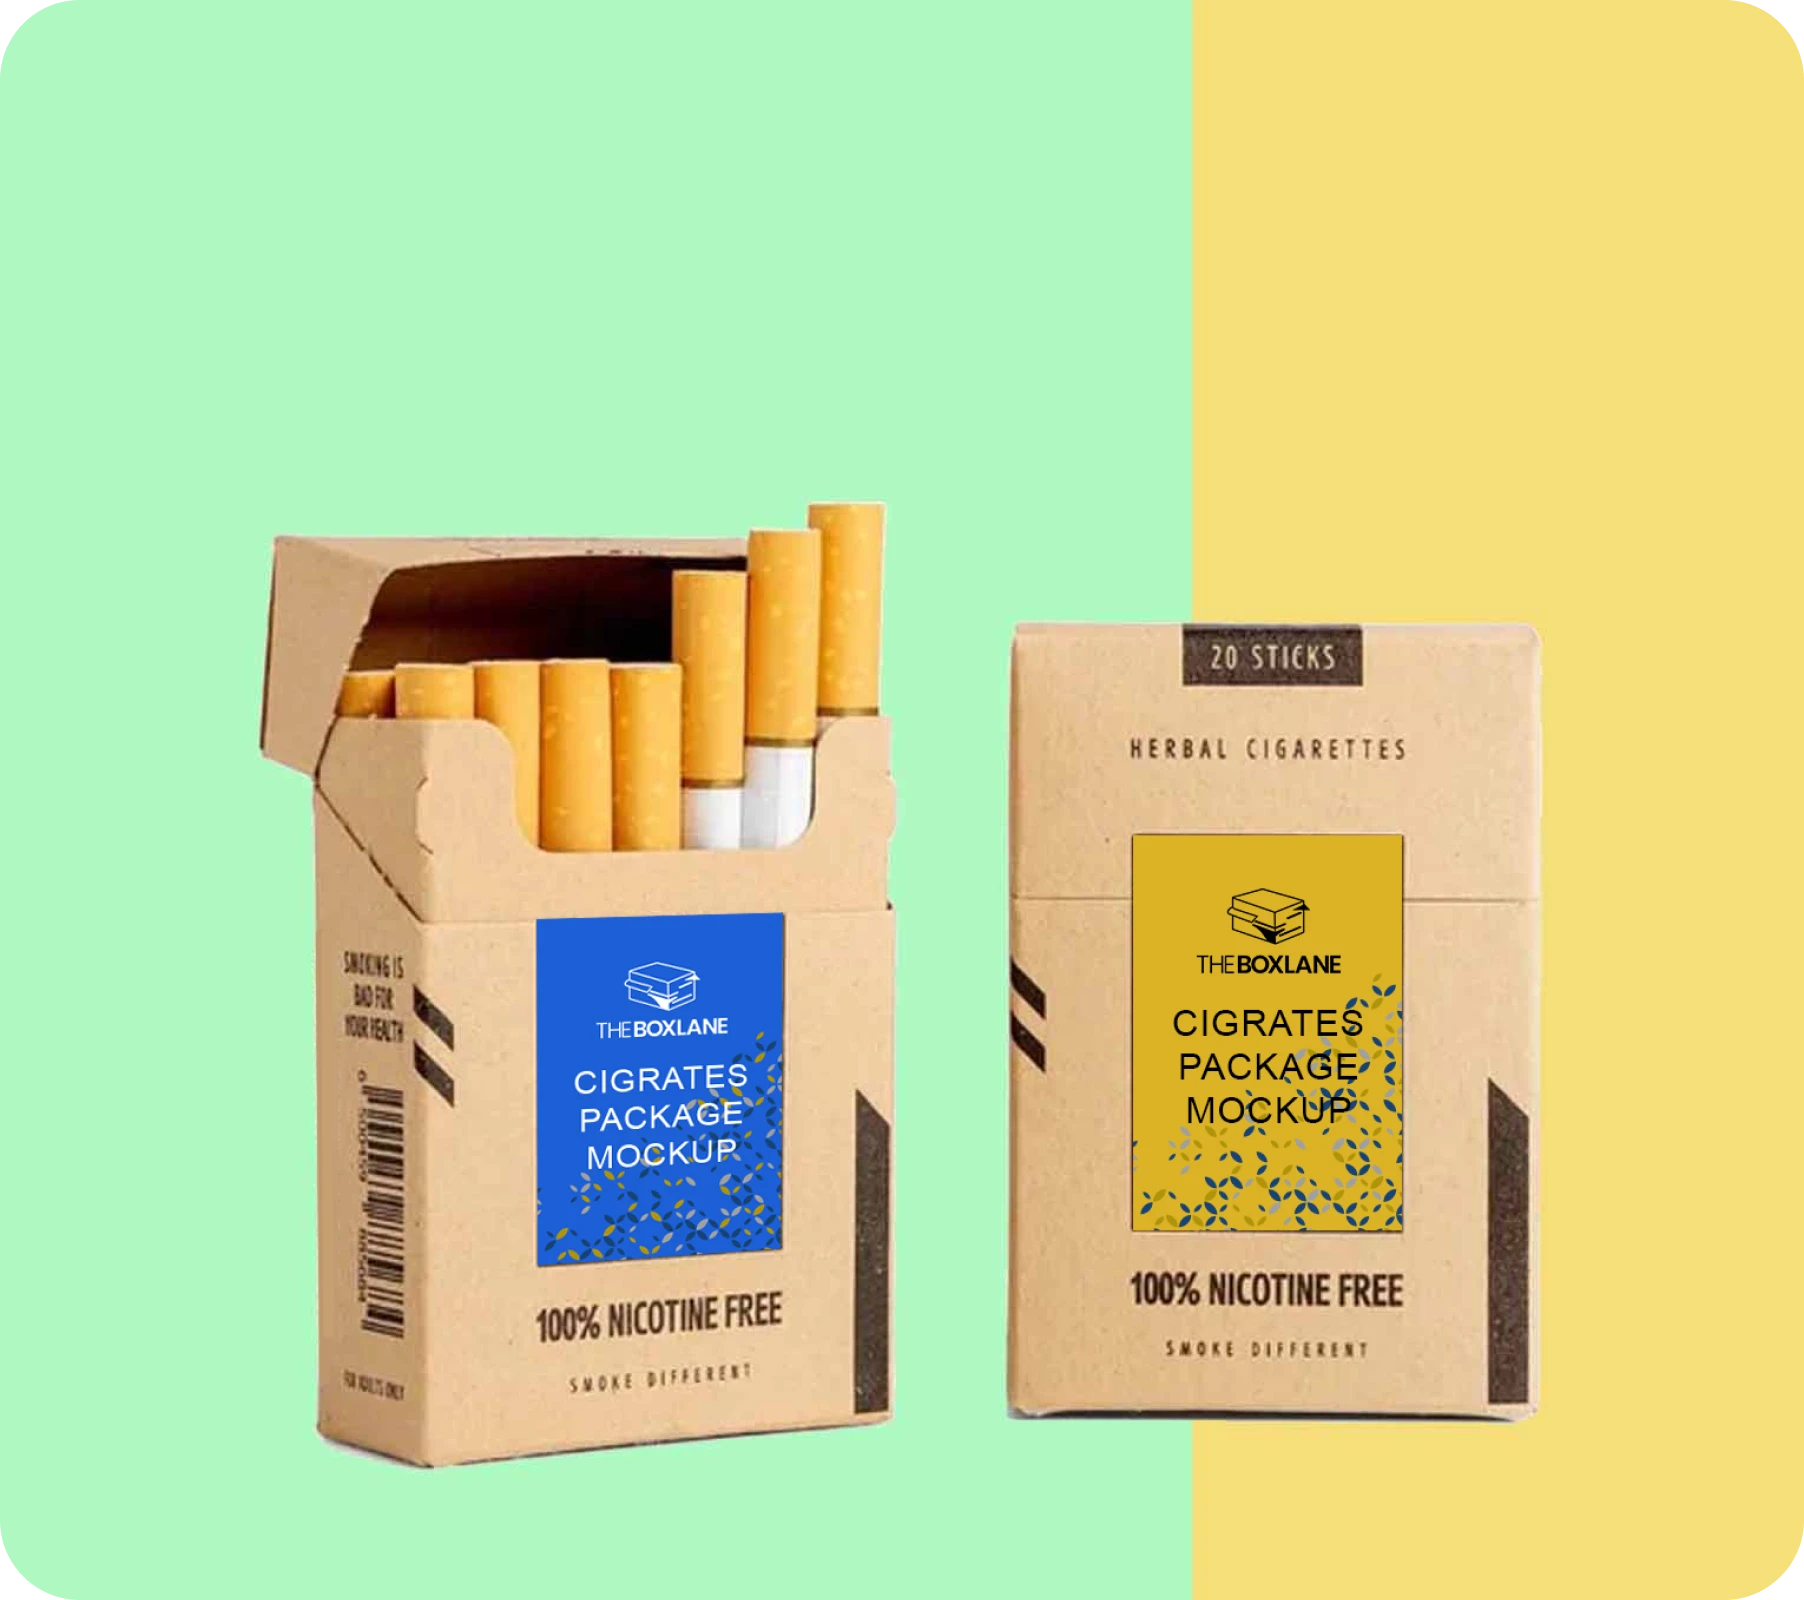 Choose The Box Lane for Cardboard Cigarette Boxes Packaging | The Box Lane